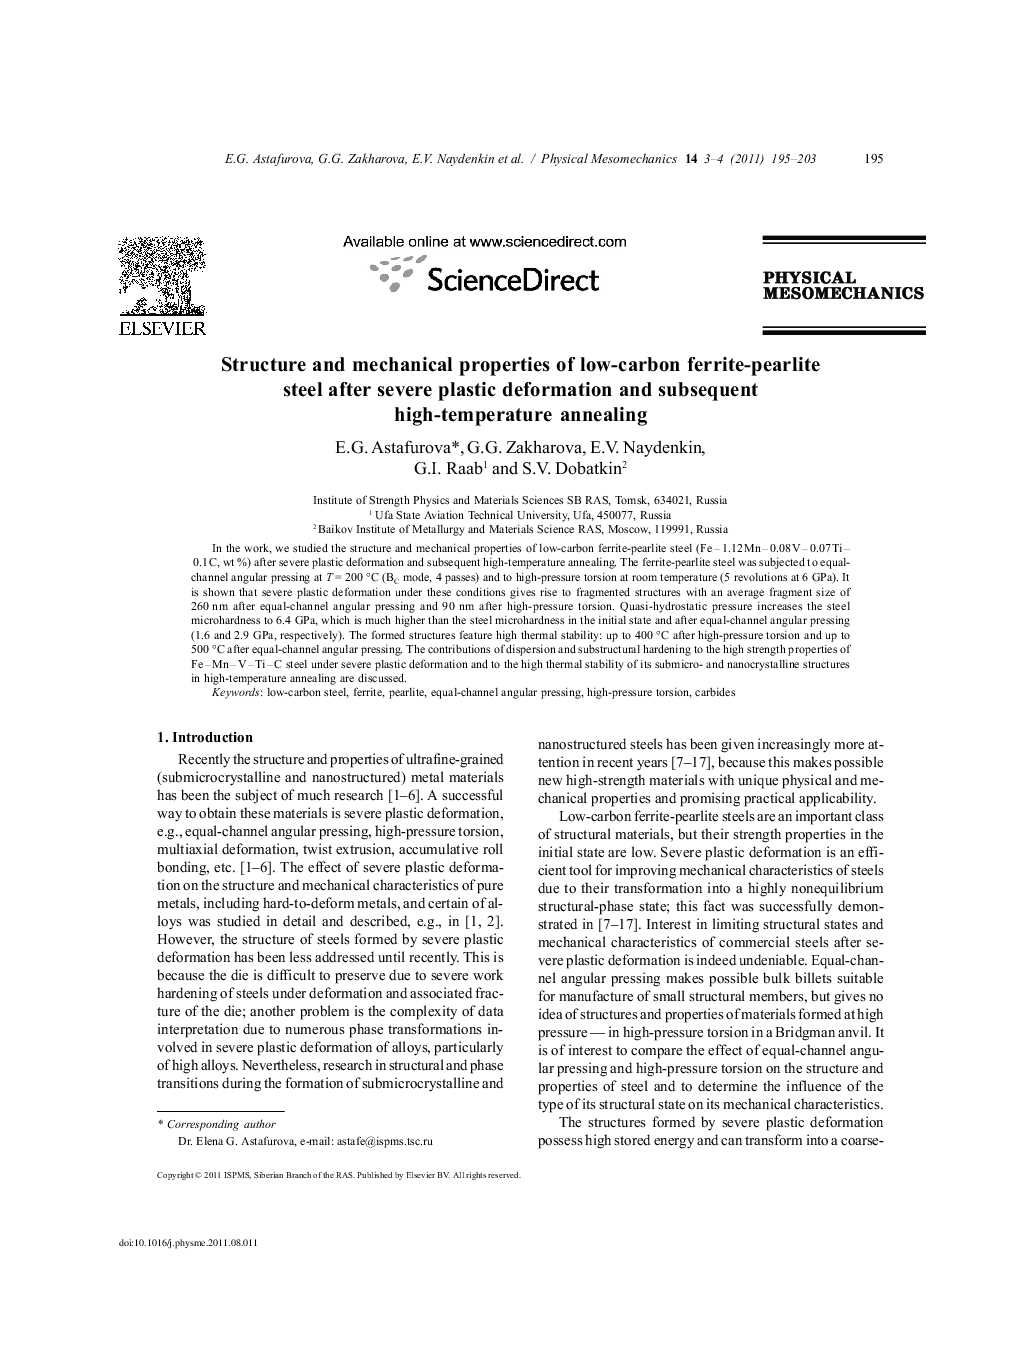 Structure and mechanical properties of low-carbon ferrite-pearlite steel after severe plastic deformation and subsequent high-temperature annealing